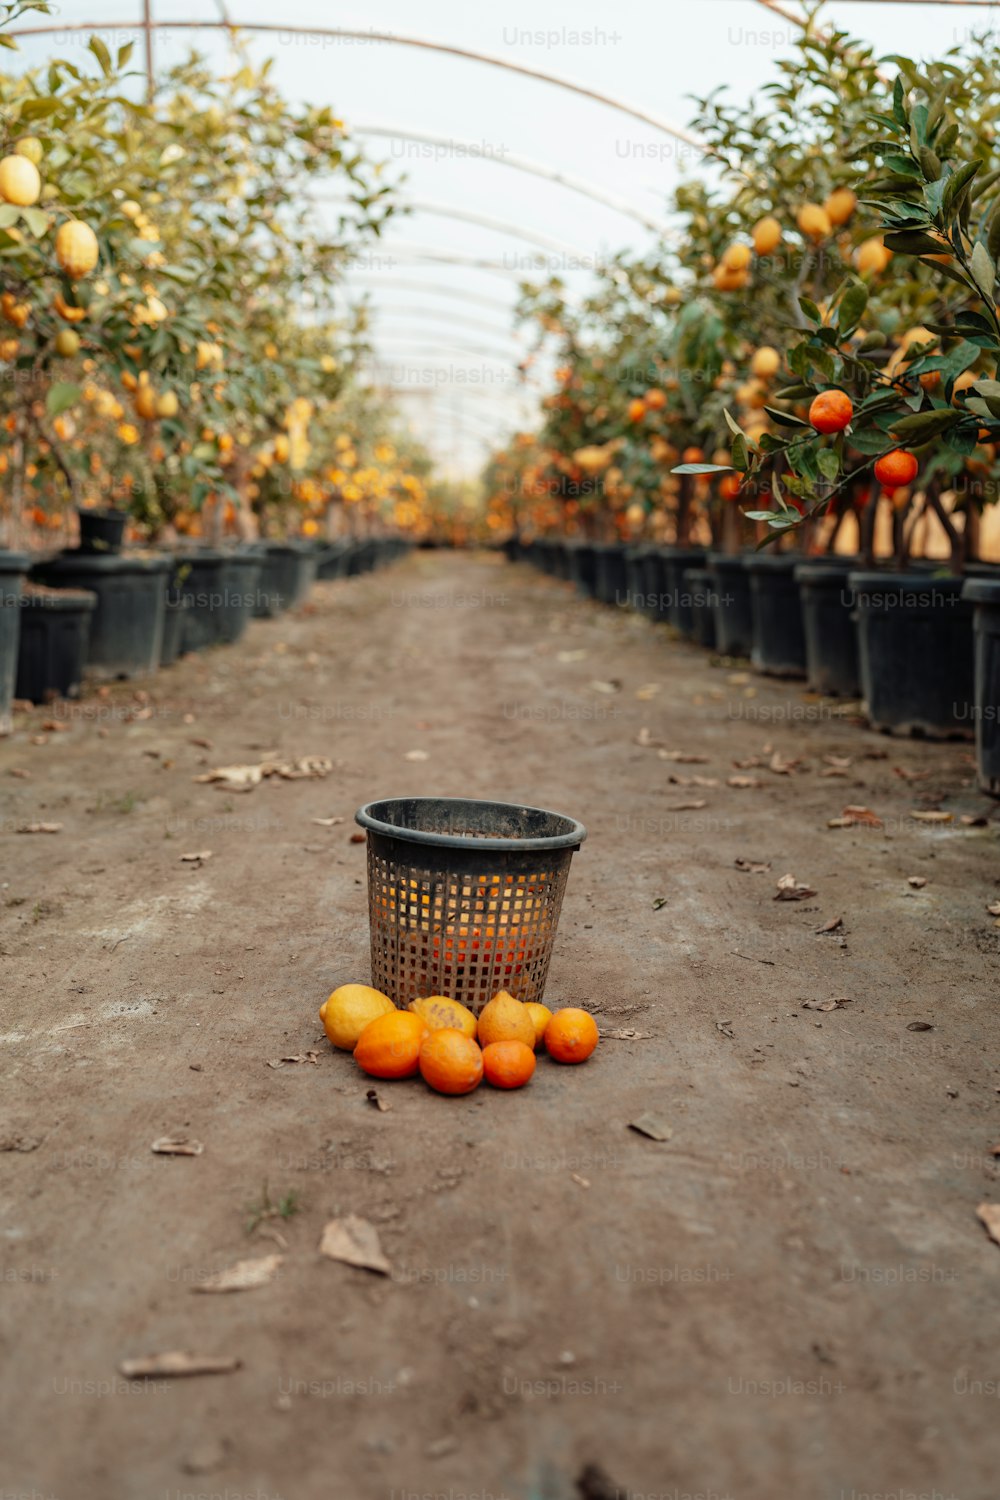 a basket of oranges sitting on a dirt road